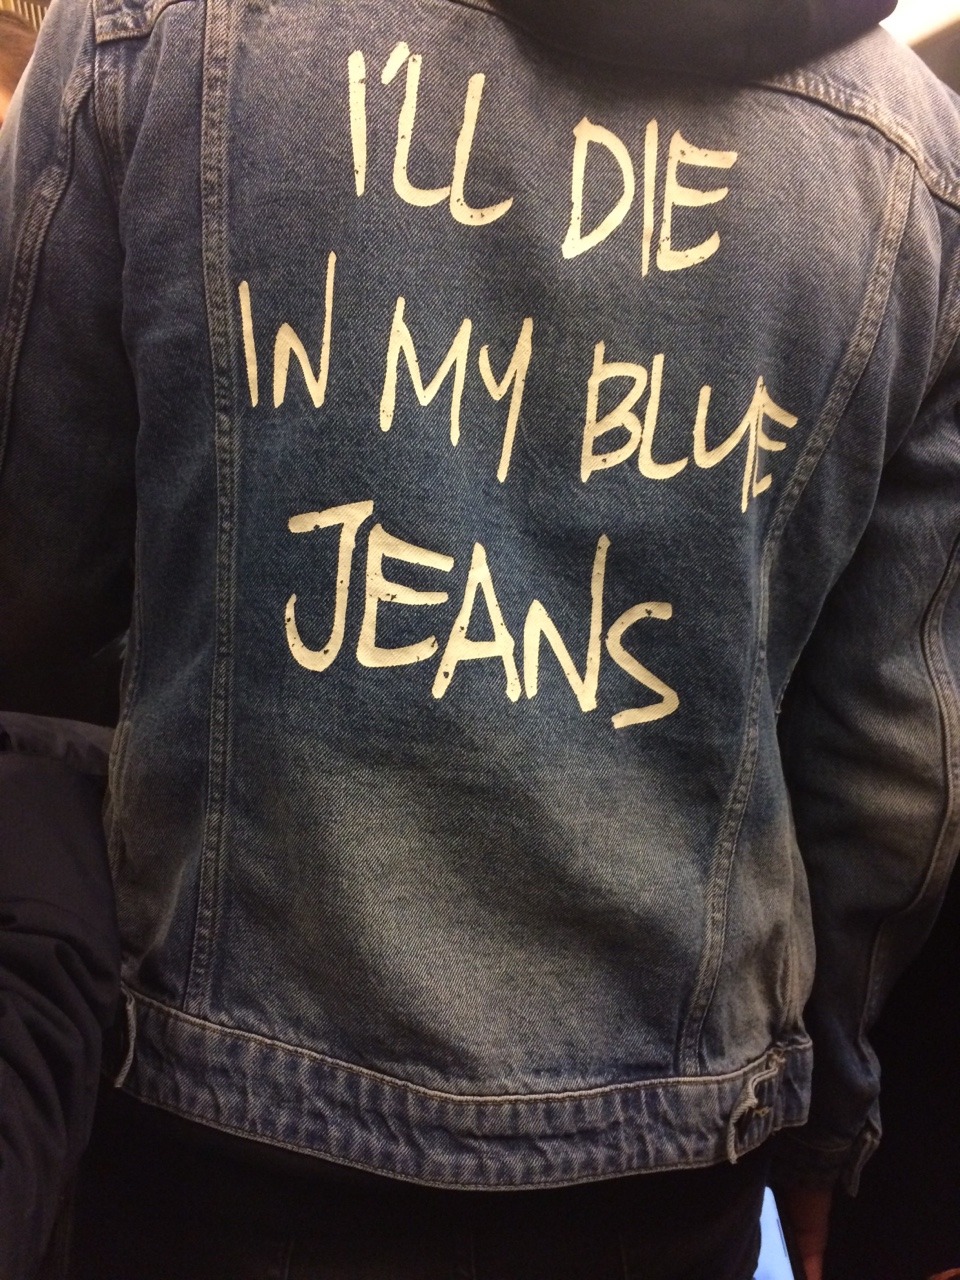 in my blue jeans